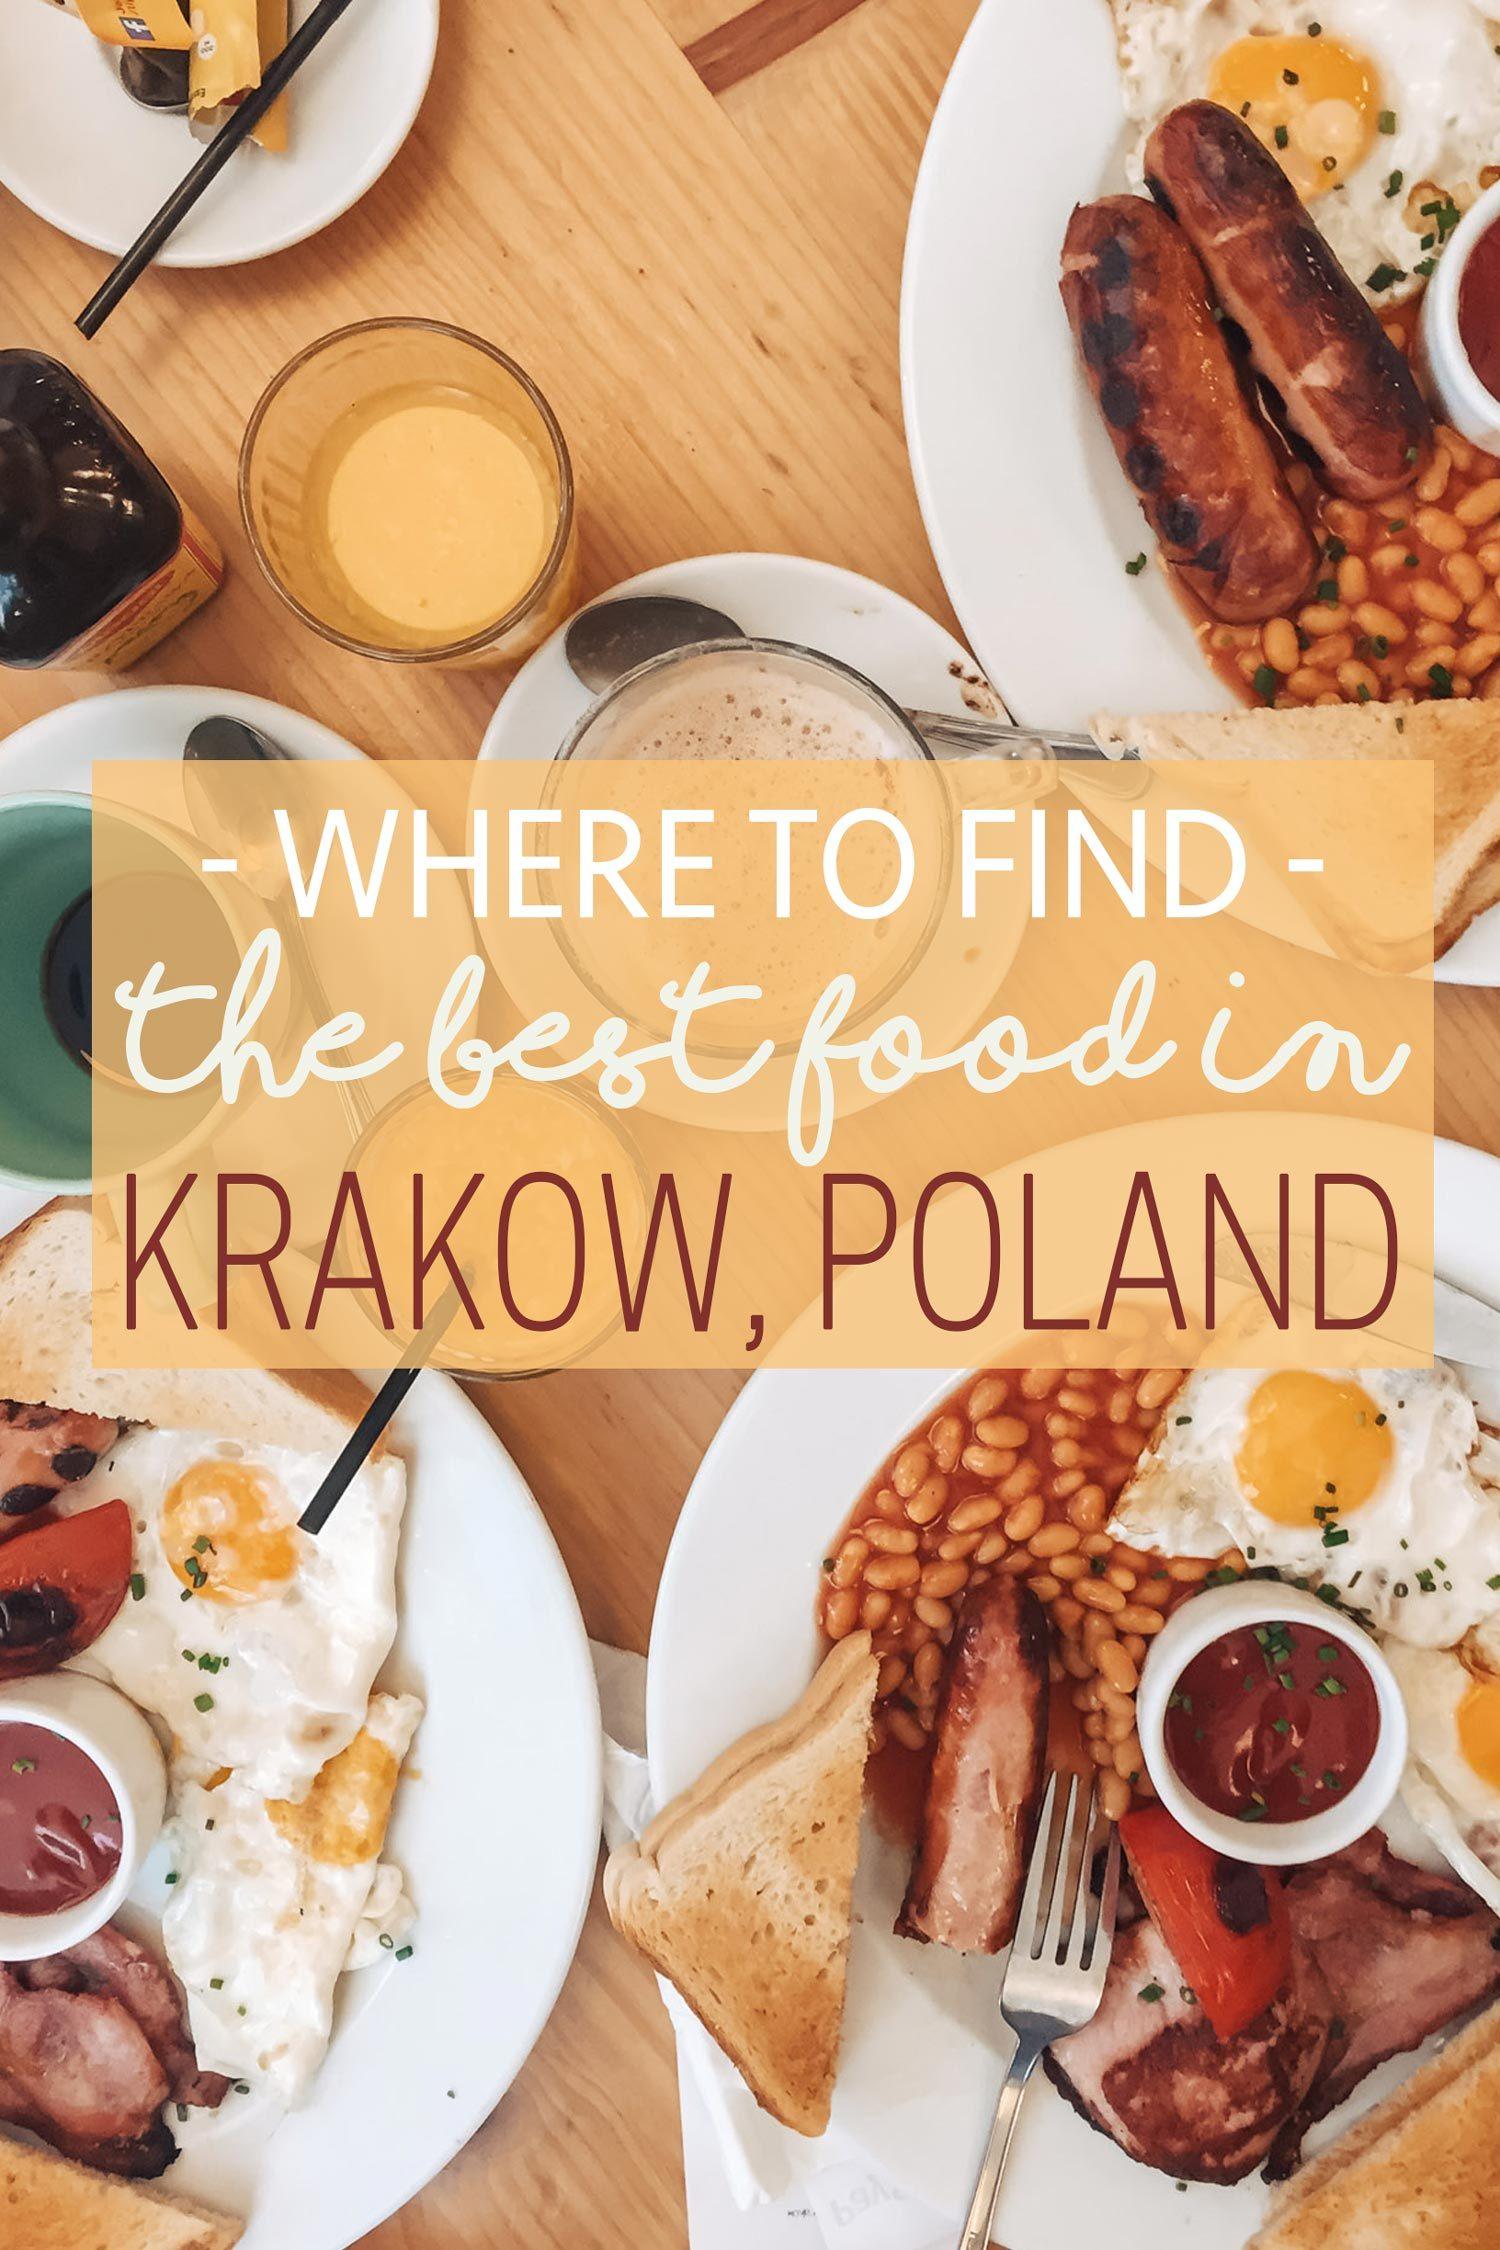 Where to Find the Best Food in Krakow